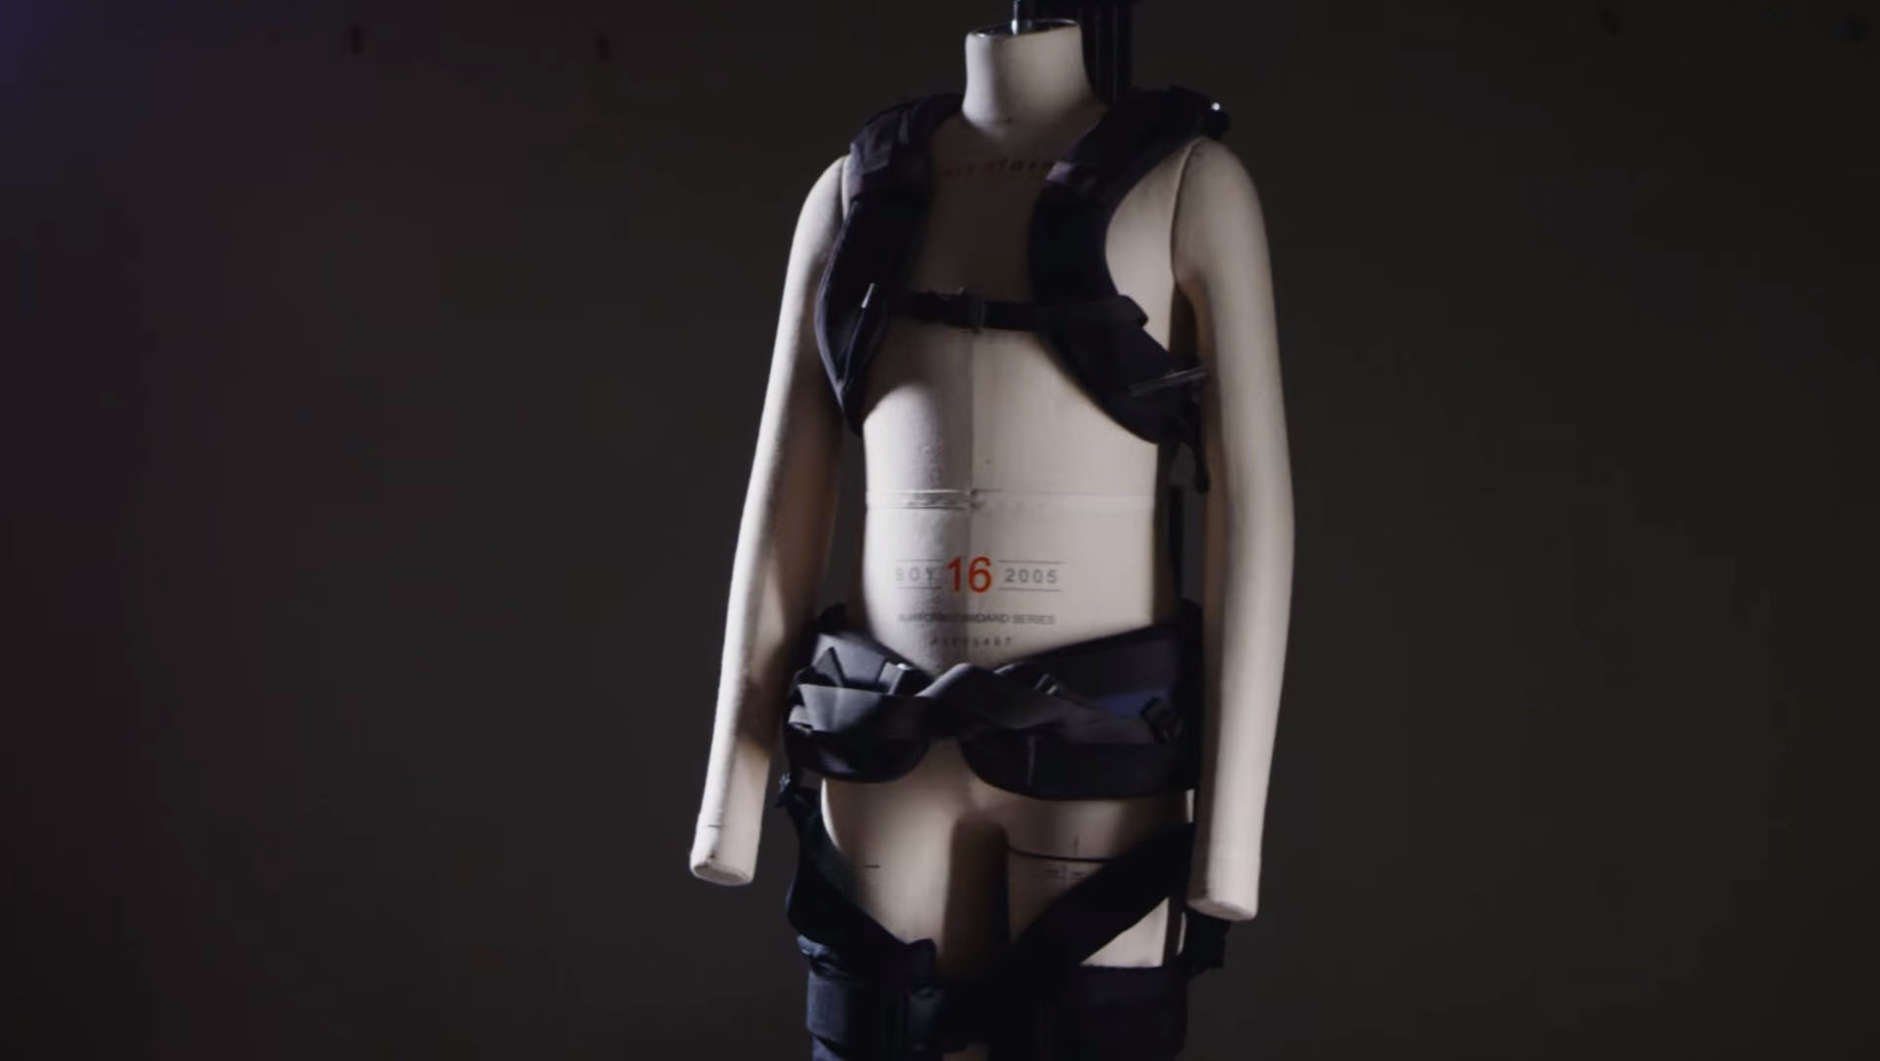 The "exosuit" developed by Lowe's and Virginia Tech is designed to help employees lift and move products without musicle fatigue. (Courtesy Lowes Companies, Inc.)